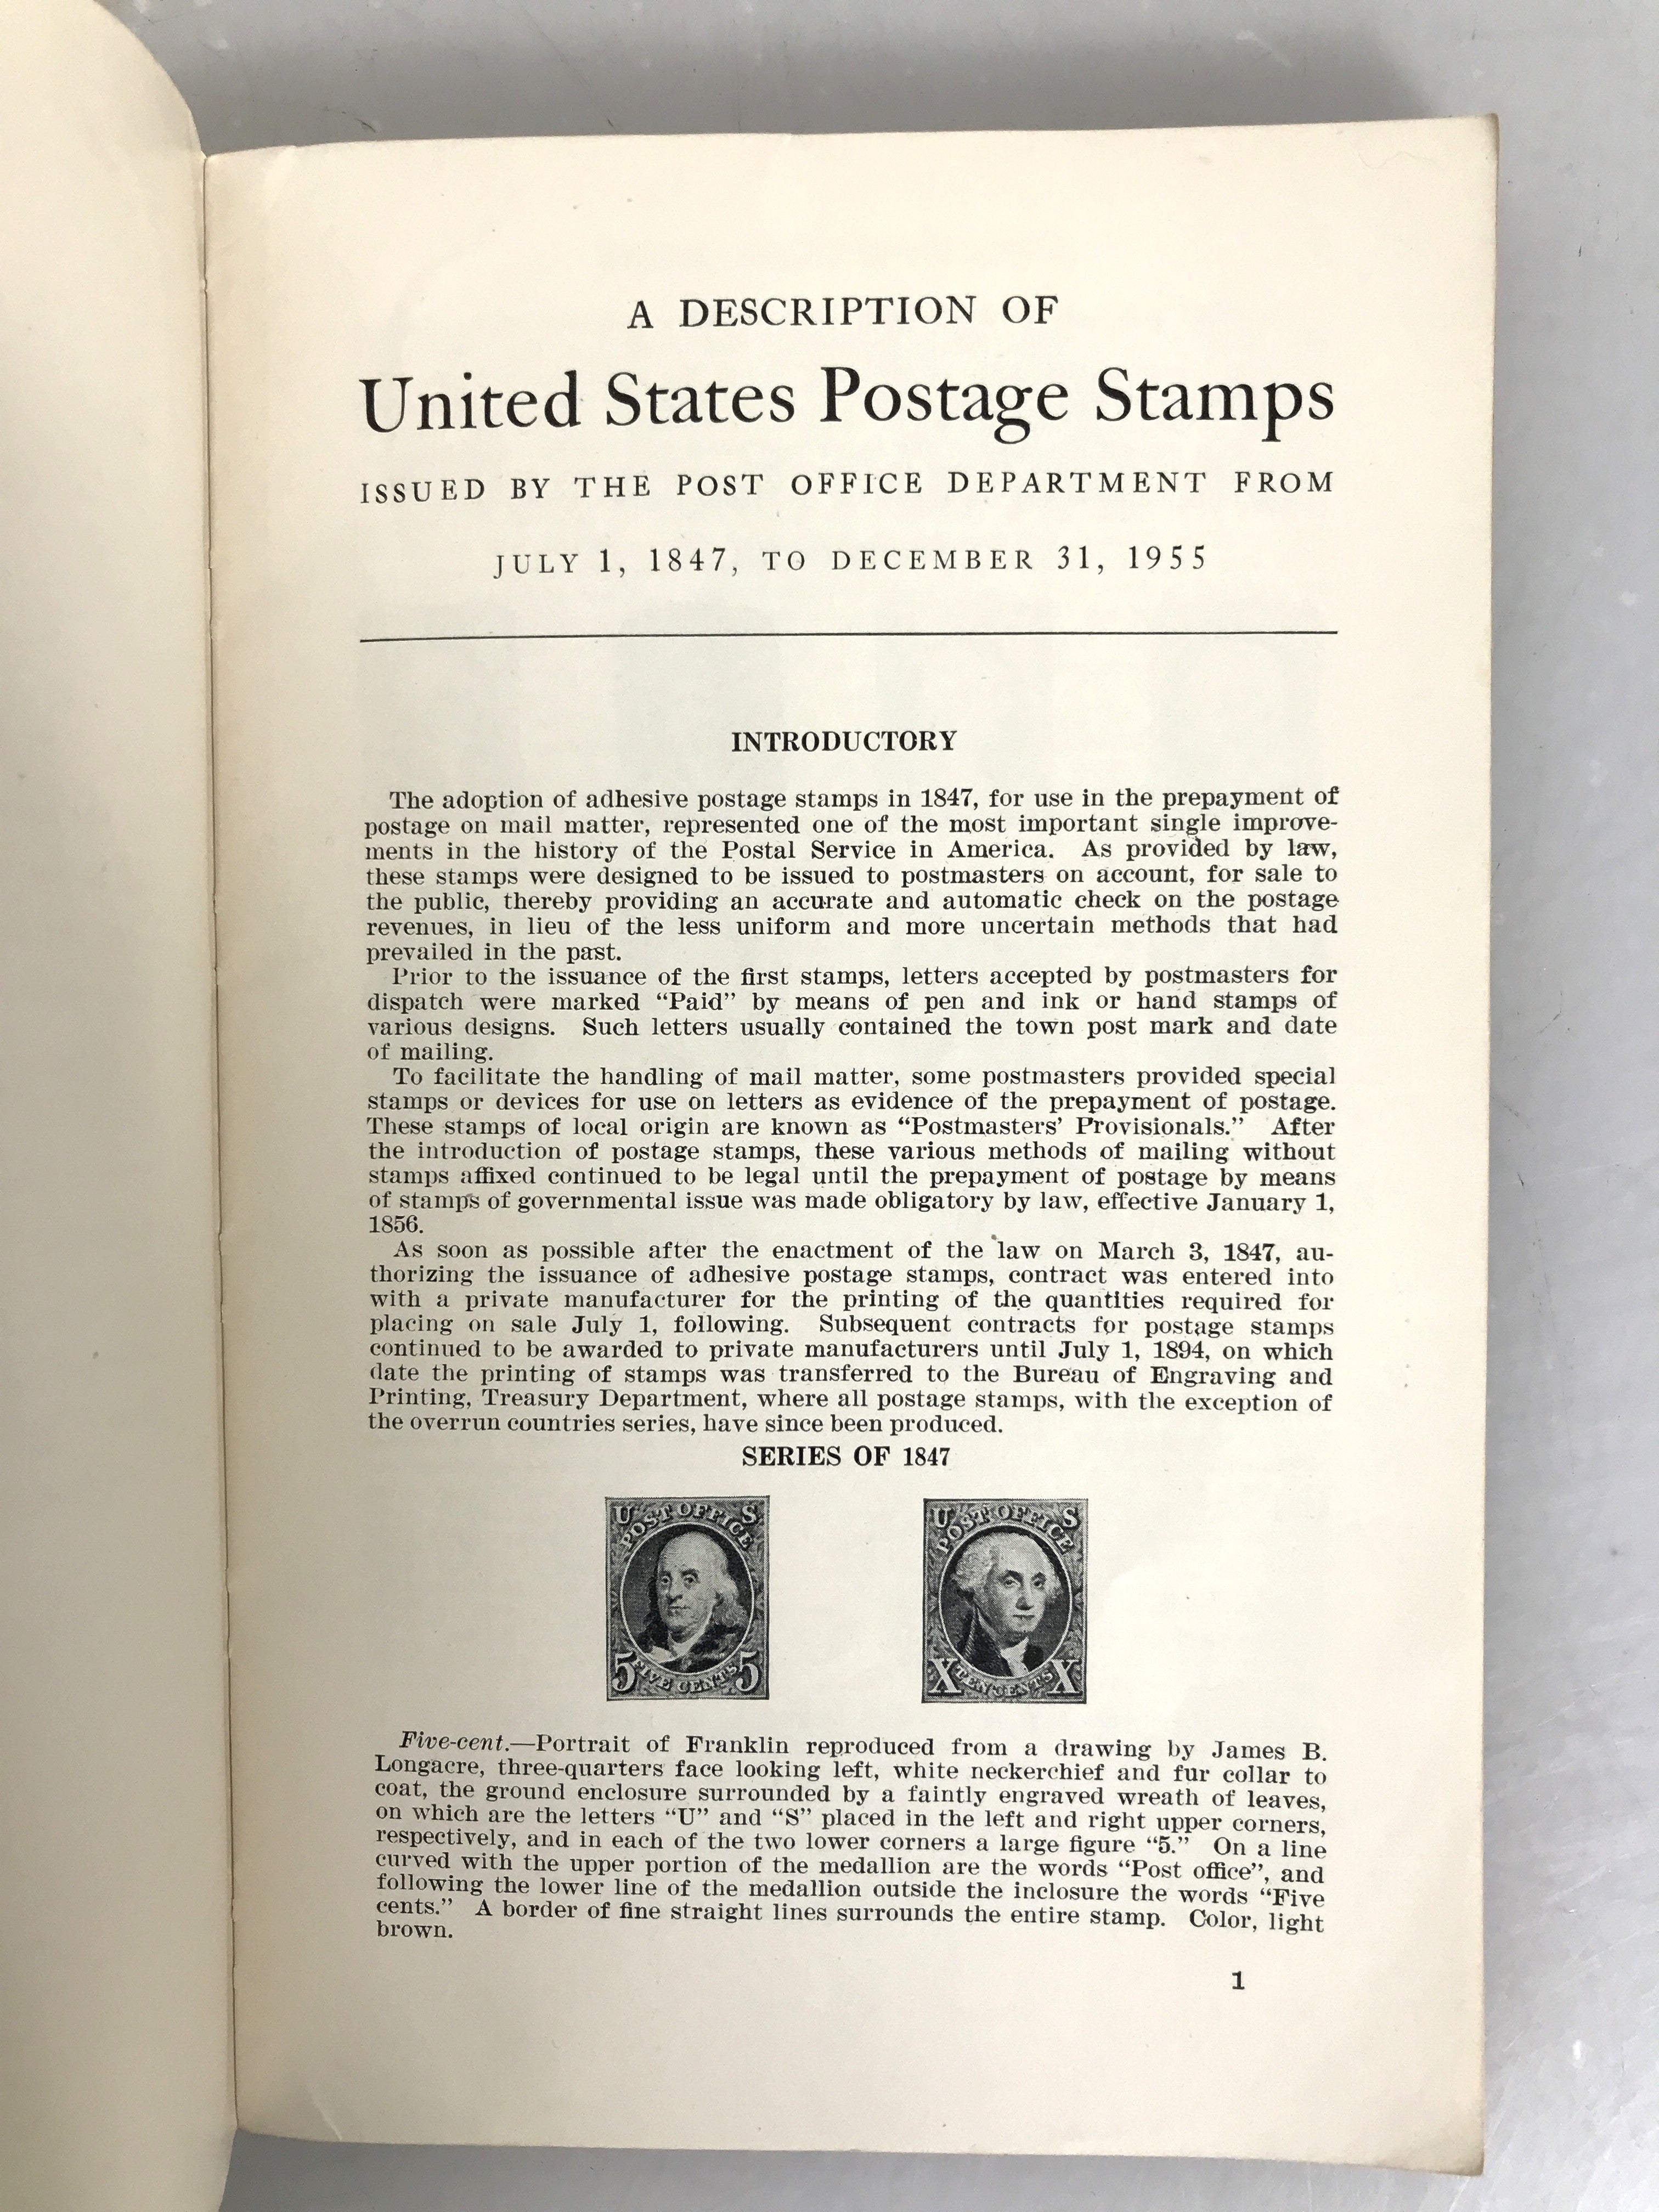 Lot - STAMPS: Very thorough U.S. stamp collection from 1847 to